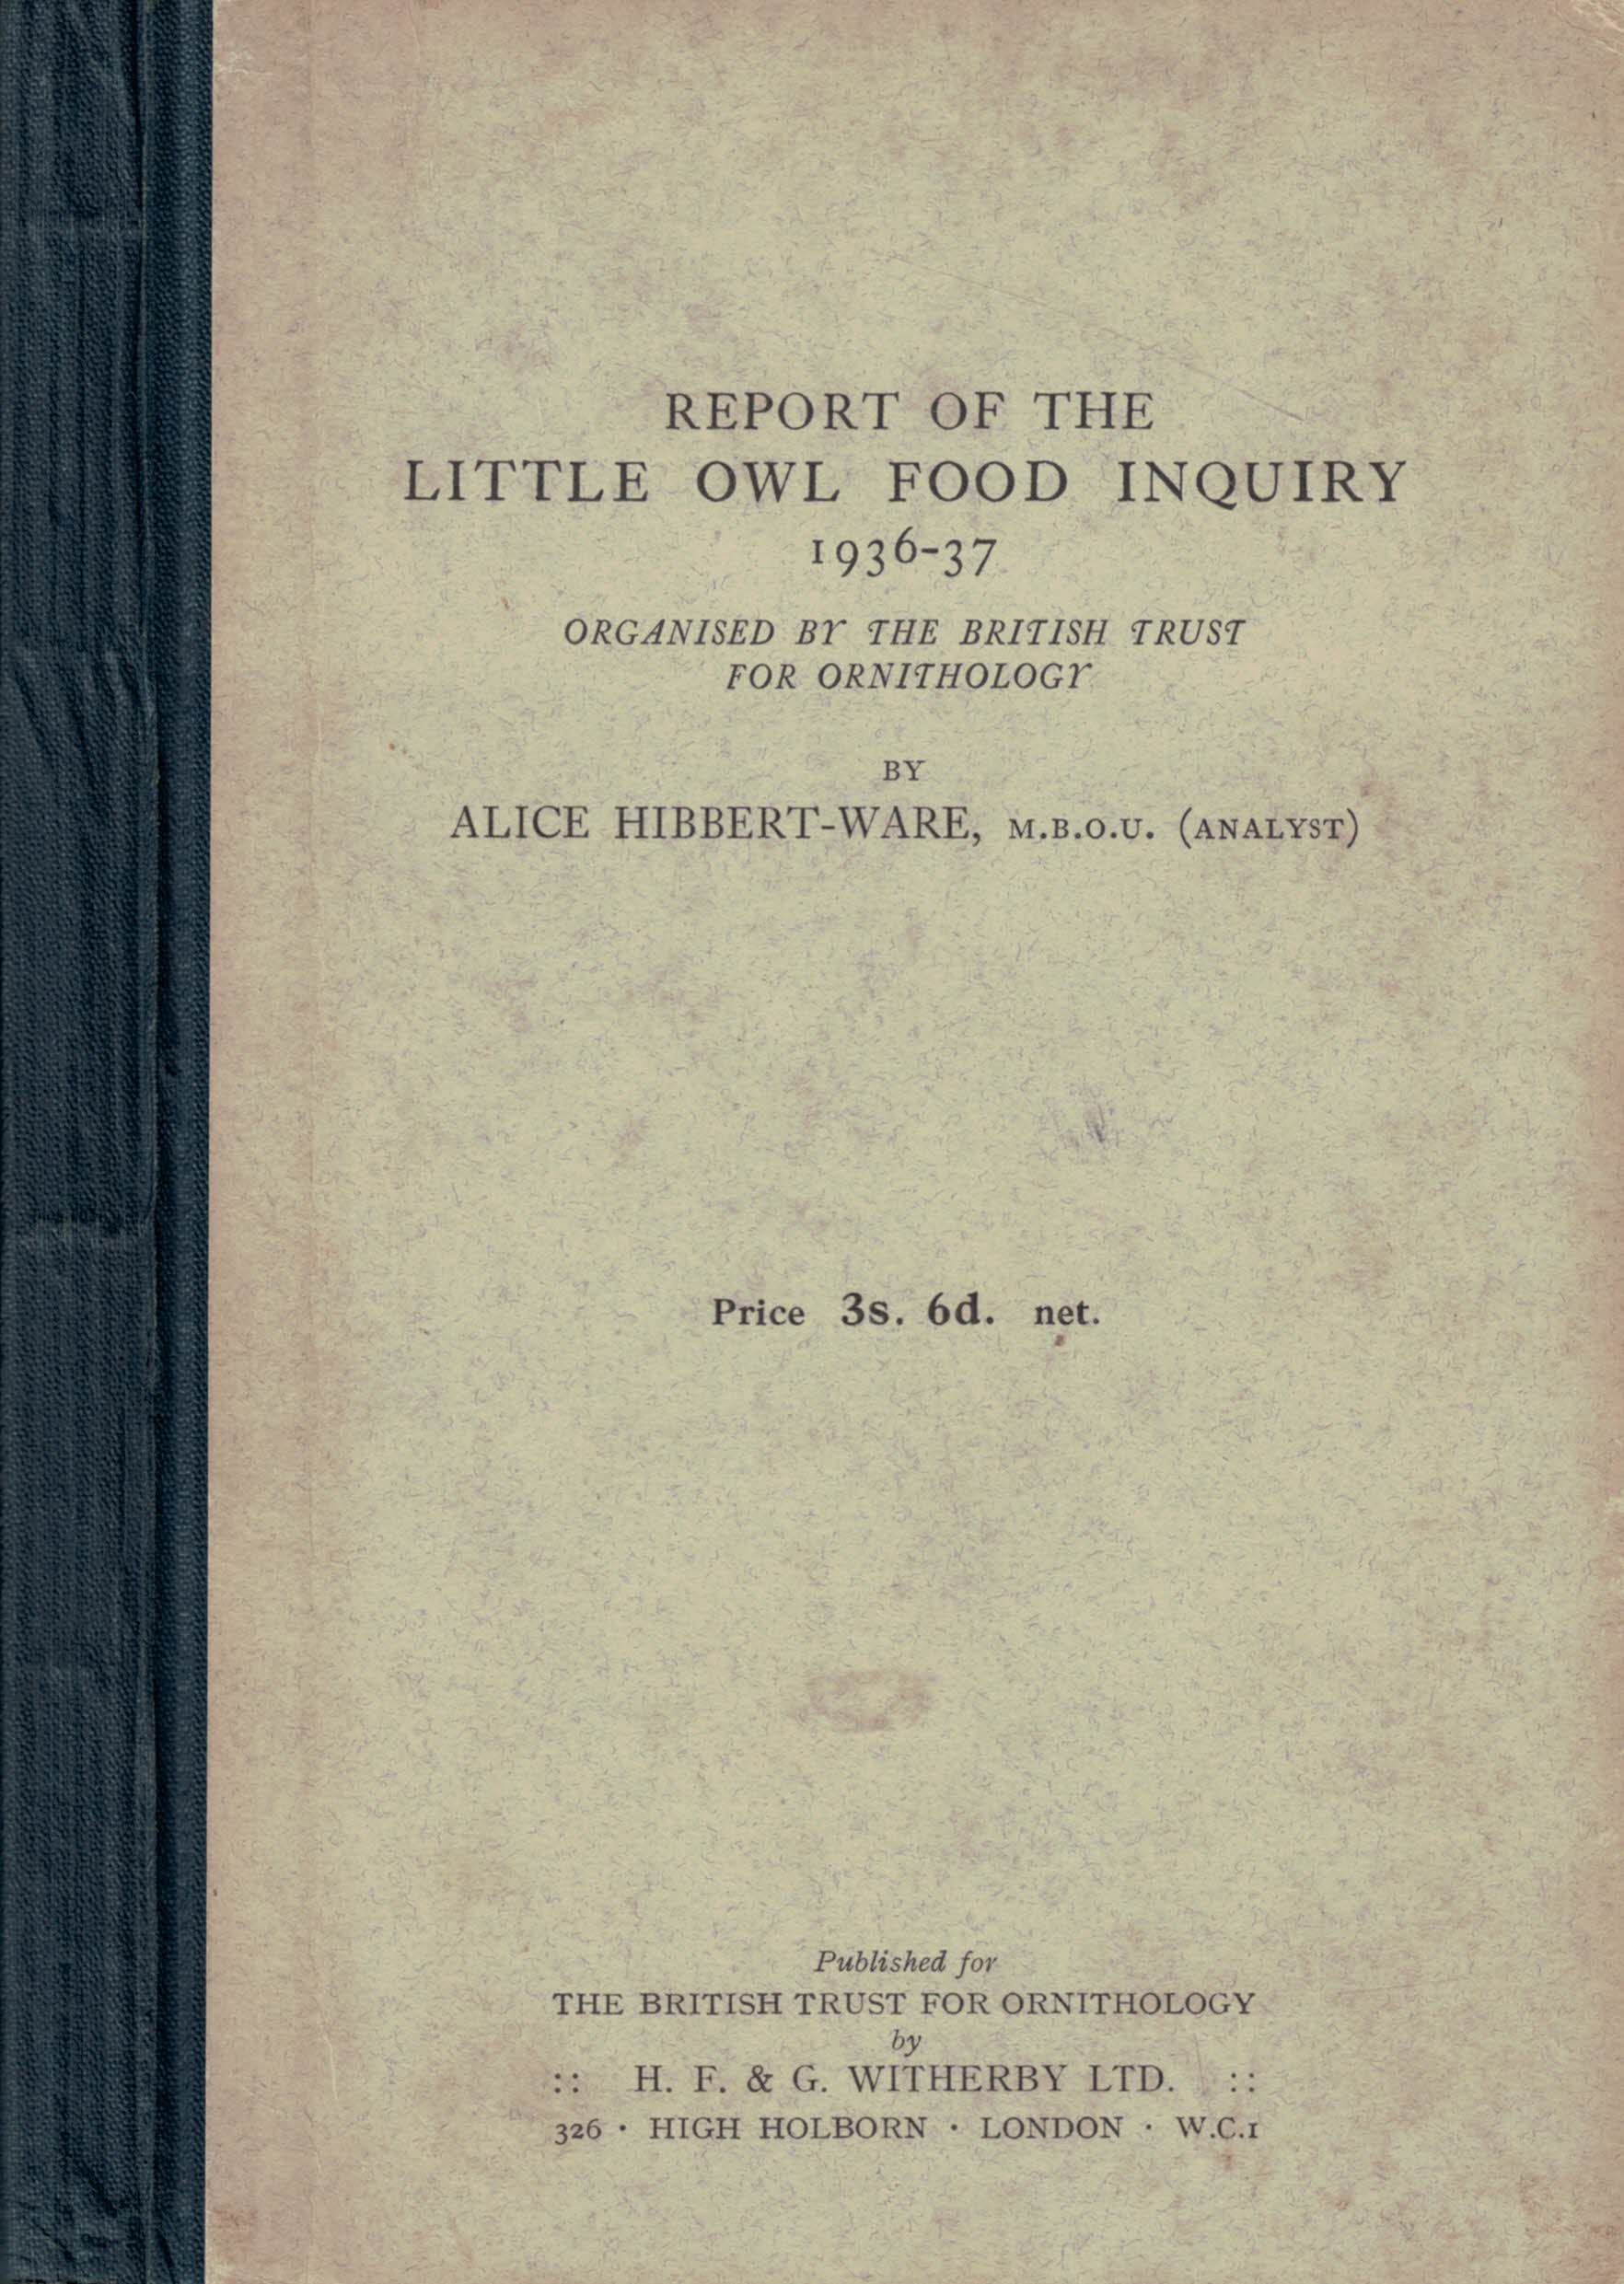 Report of the Little Owl Food Inquiry 1936-37. Organised by The British Trust for Ornithology.